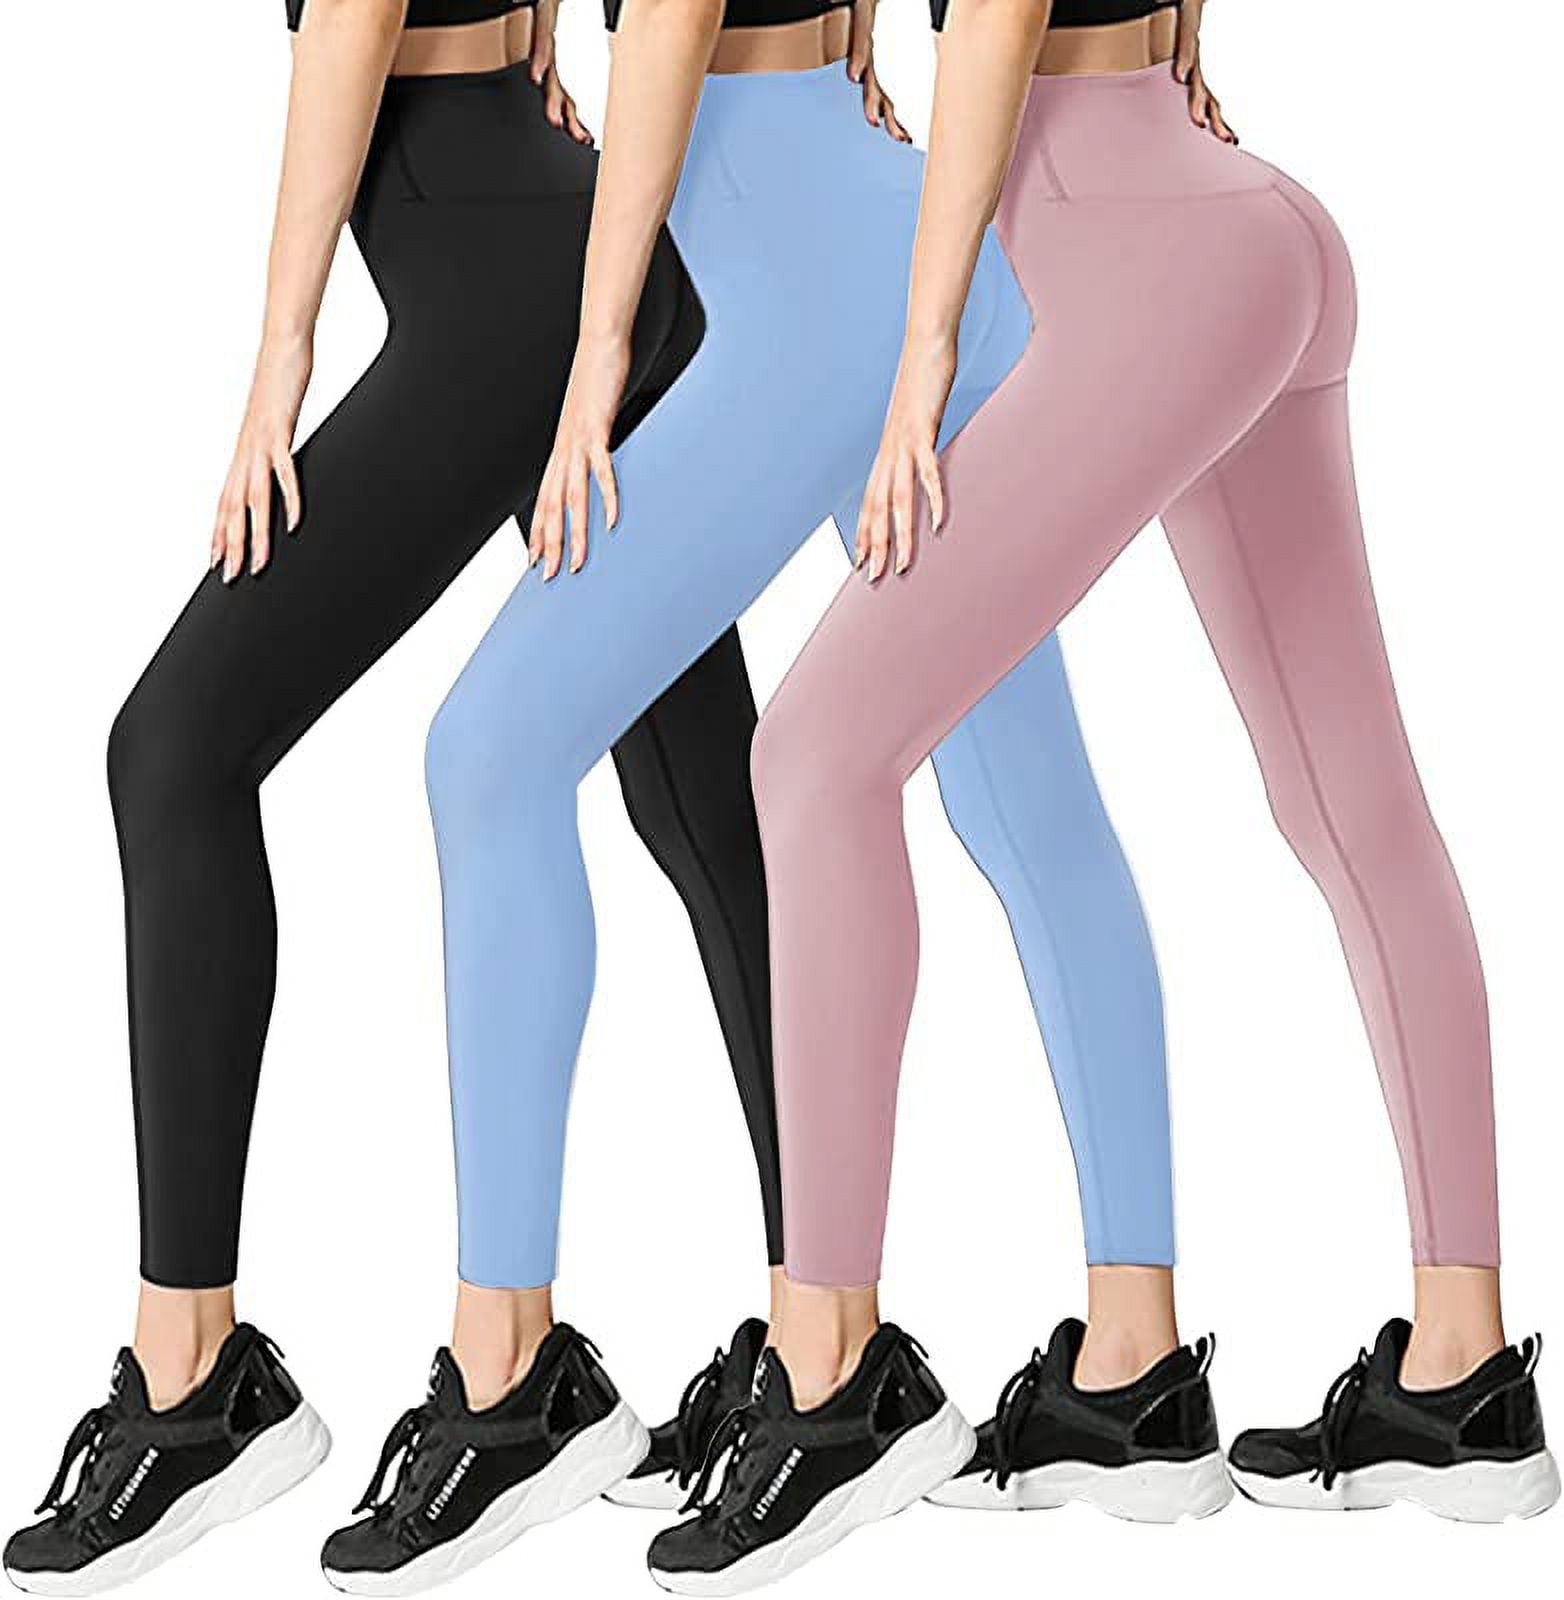 FULLSOFT 3 Pack Leggings for Women Non See Through-Workout High Waisted  Tummy Control Running Yoga Pants 01-3 Pack Black black black Large-X-Large